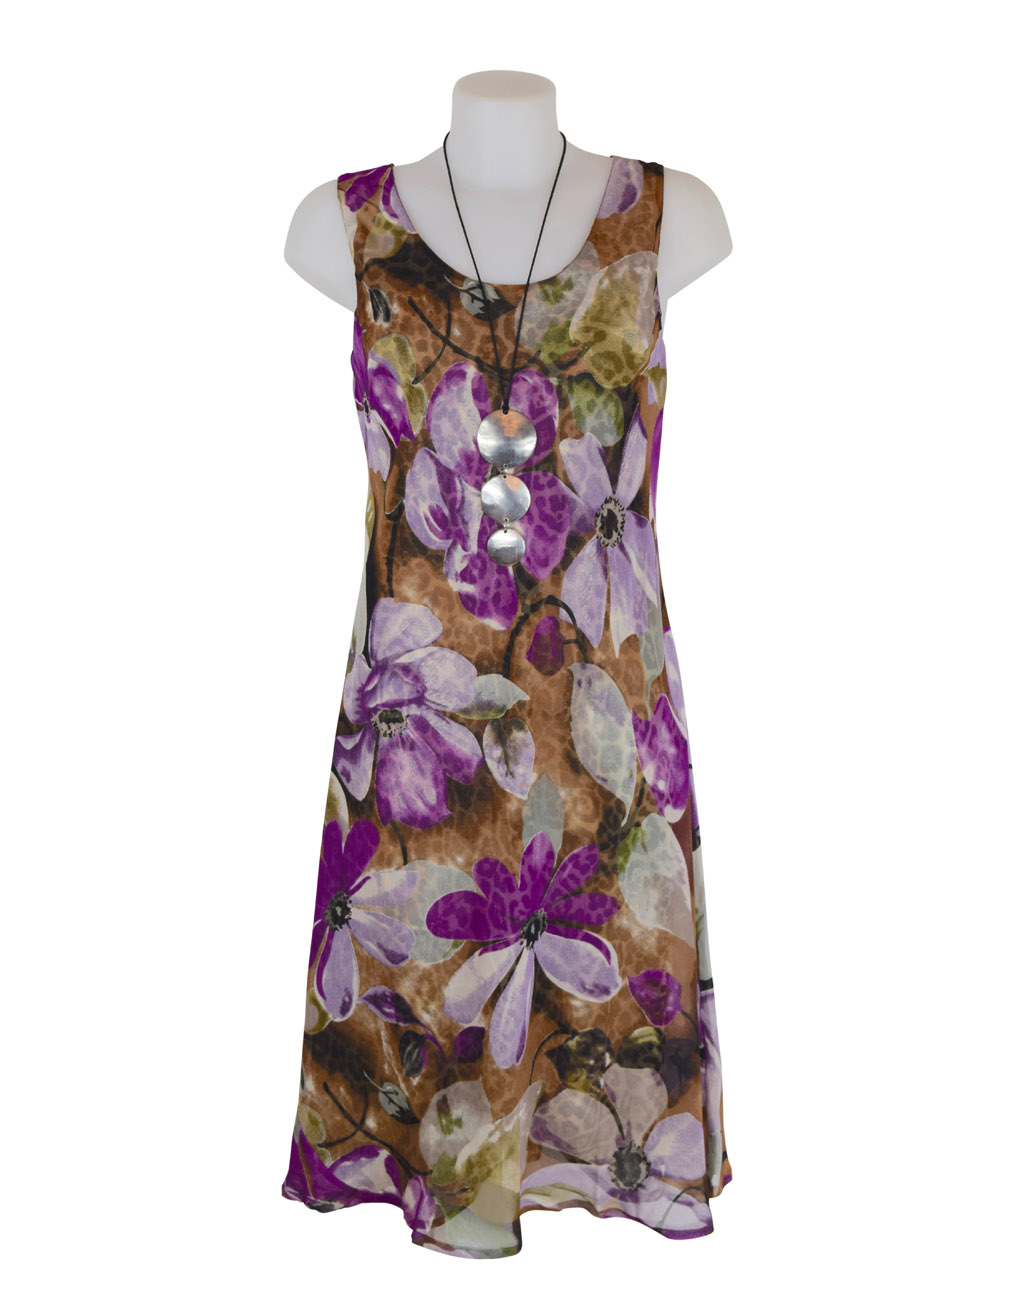 Paramour Reversible 2 In 1 Sleeveless Dress Floral / Leopard B